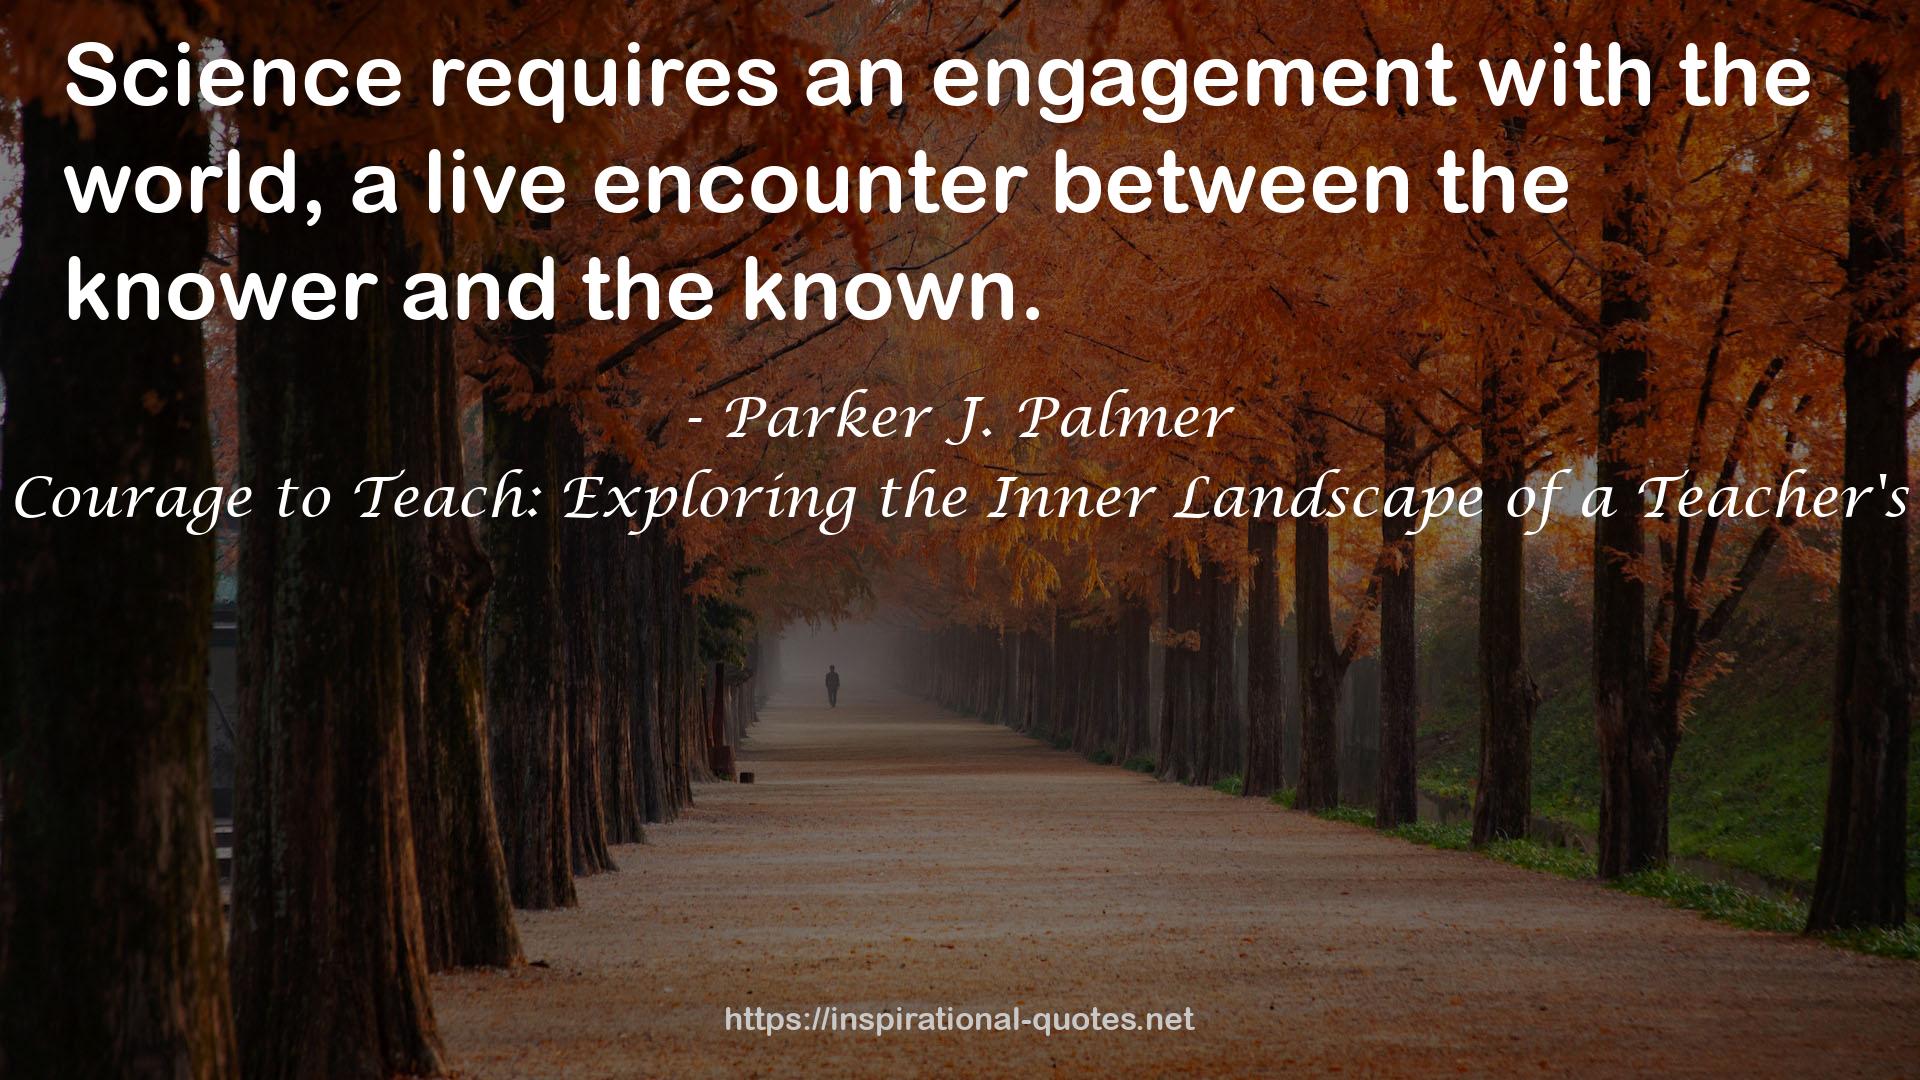 The Courage to Teach: Exploring the Inner Landscape of a Teacher's Life QUOTES